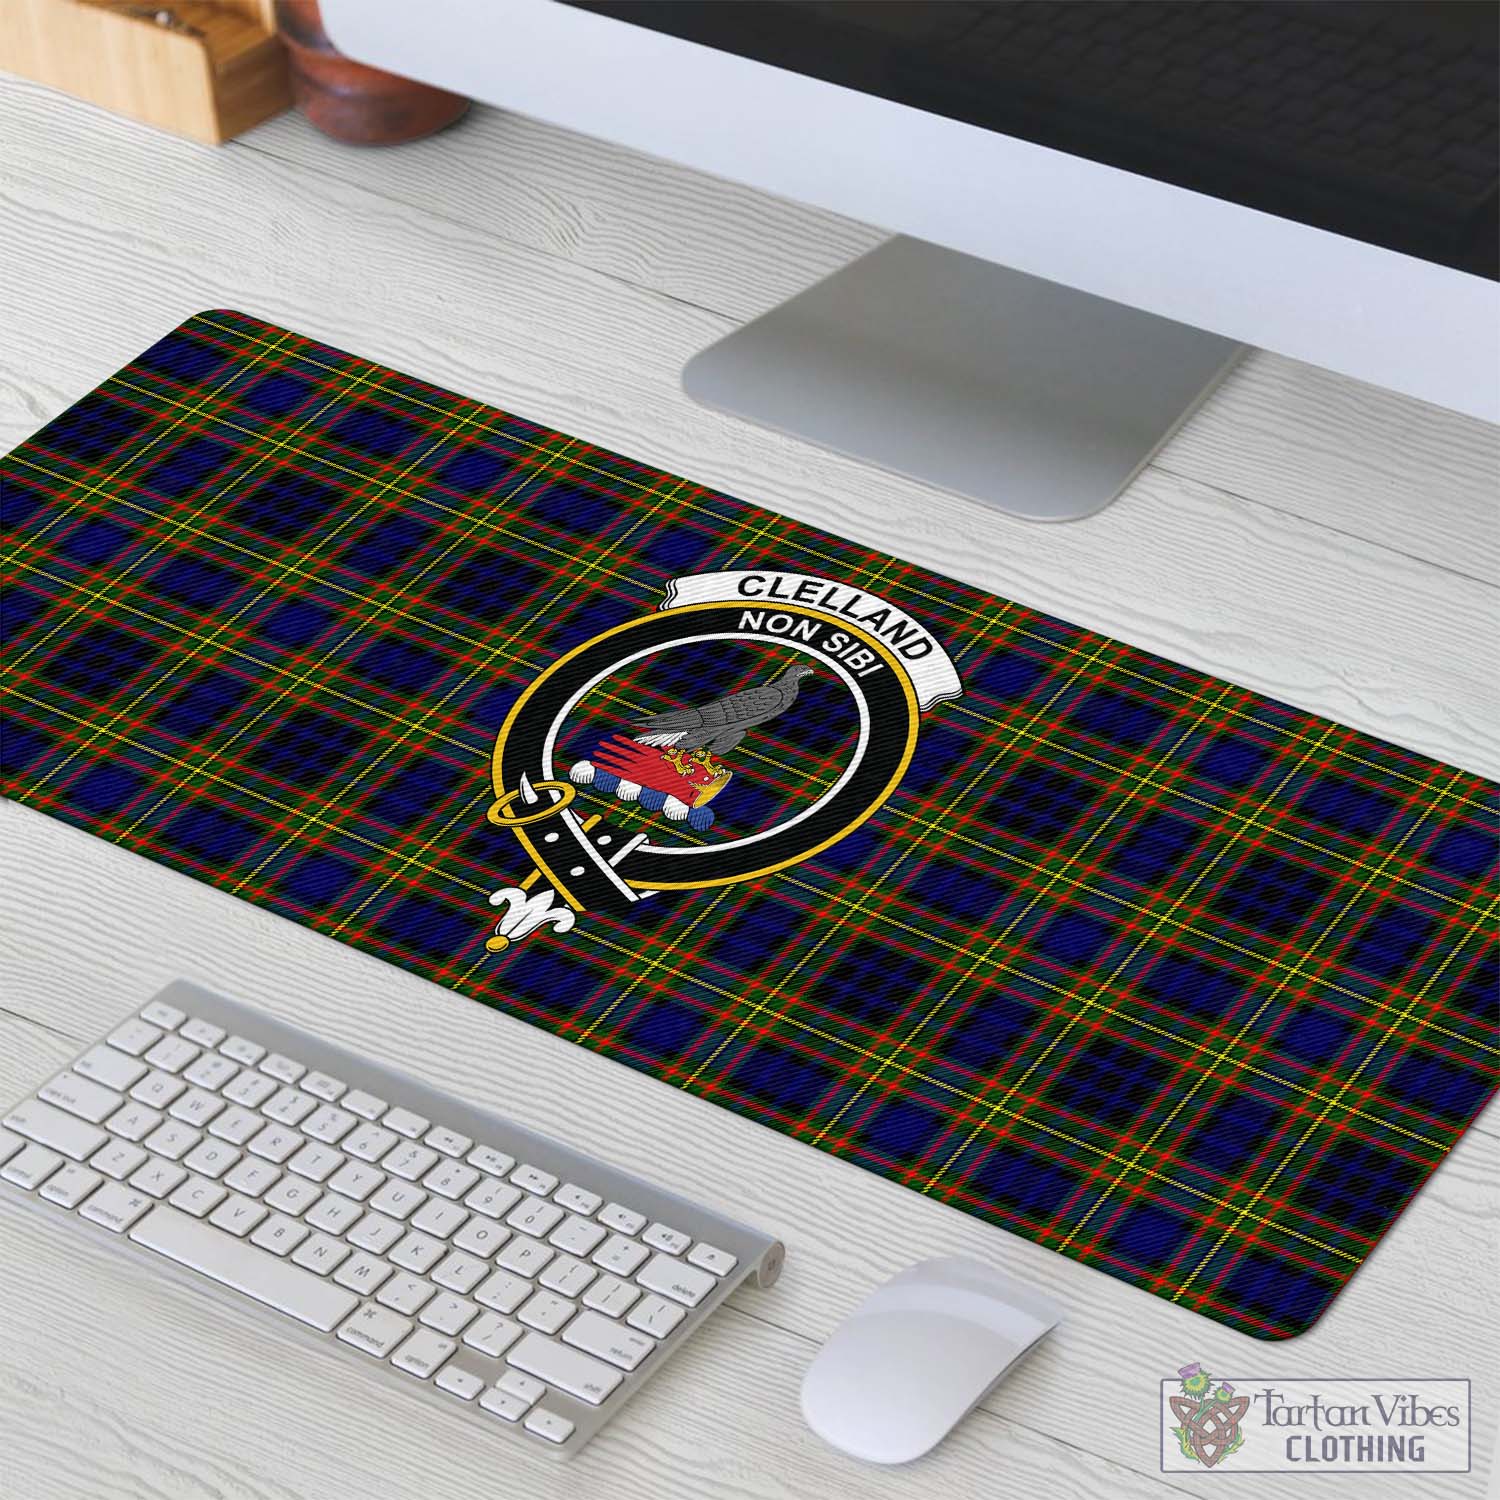 Tartan Vibes Clothing Clelland Modern Tartan Mouse Pad with Family Crest